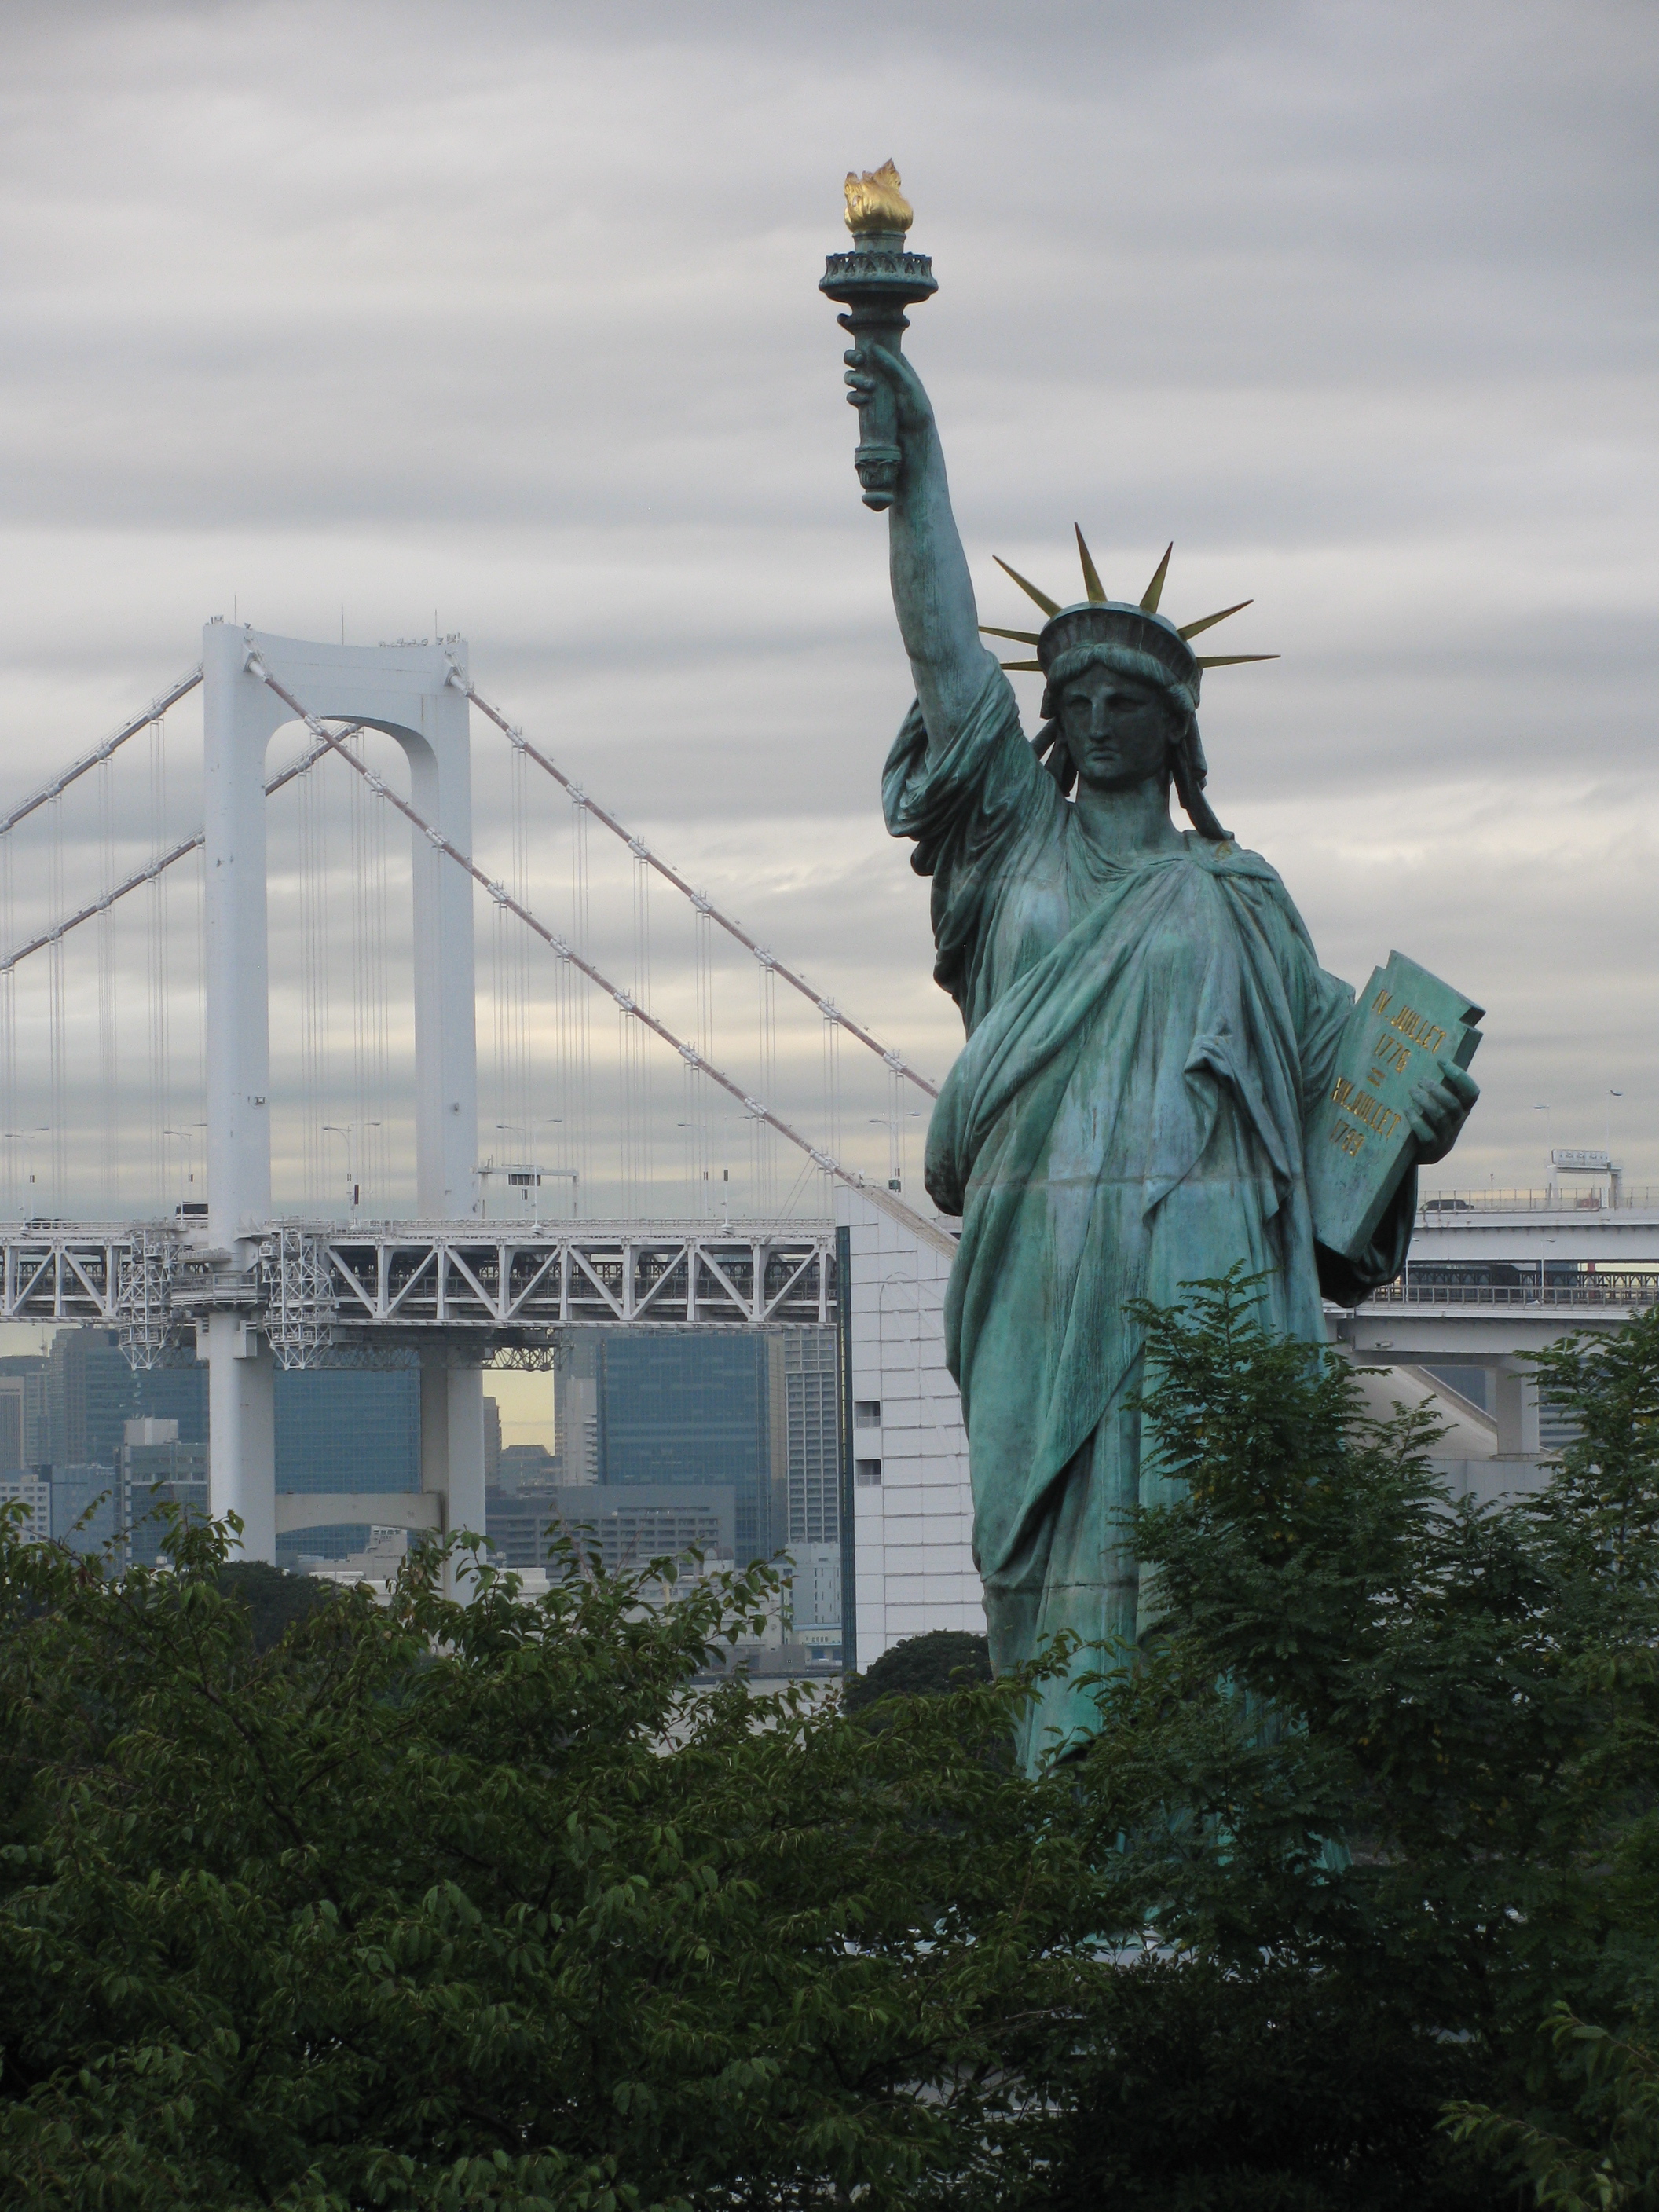 replicas of Statue of Liberty | Around and About with Viv